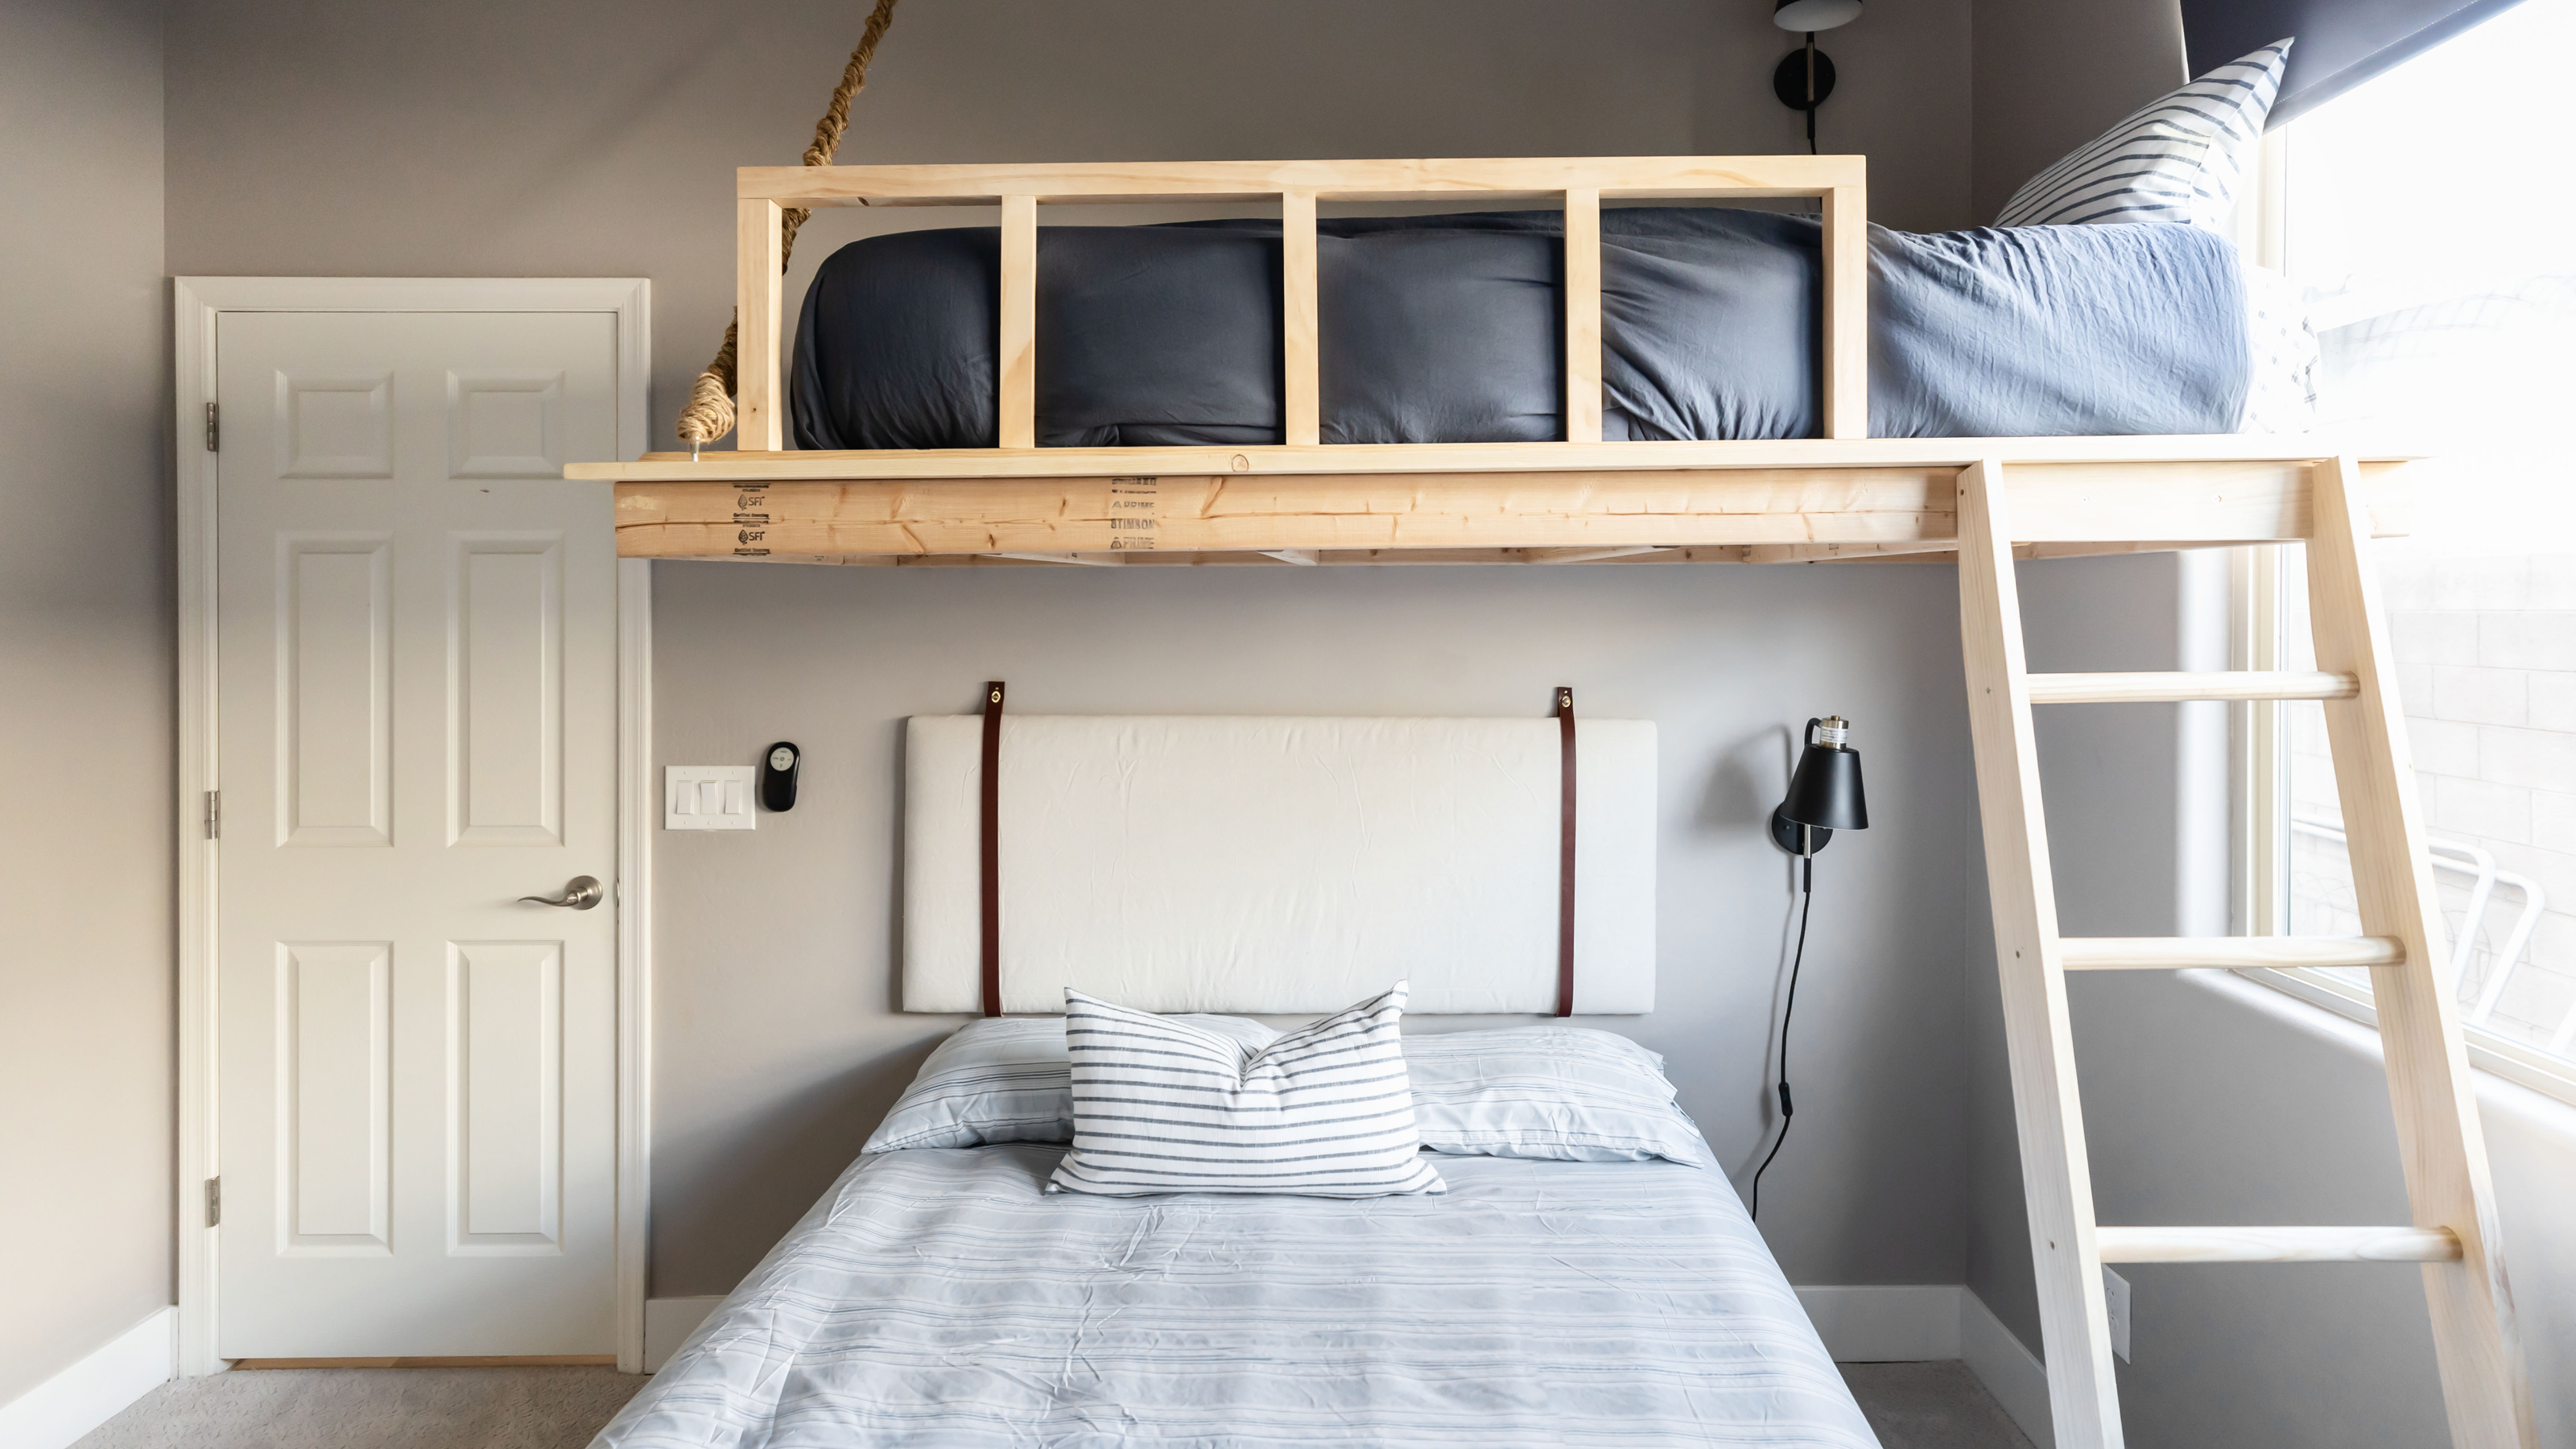 How To Build A Loft Bed Diy With This, How To Build A Bed Attached The Wall